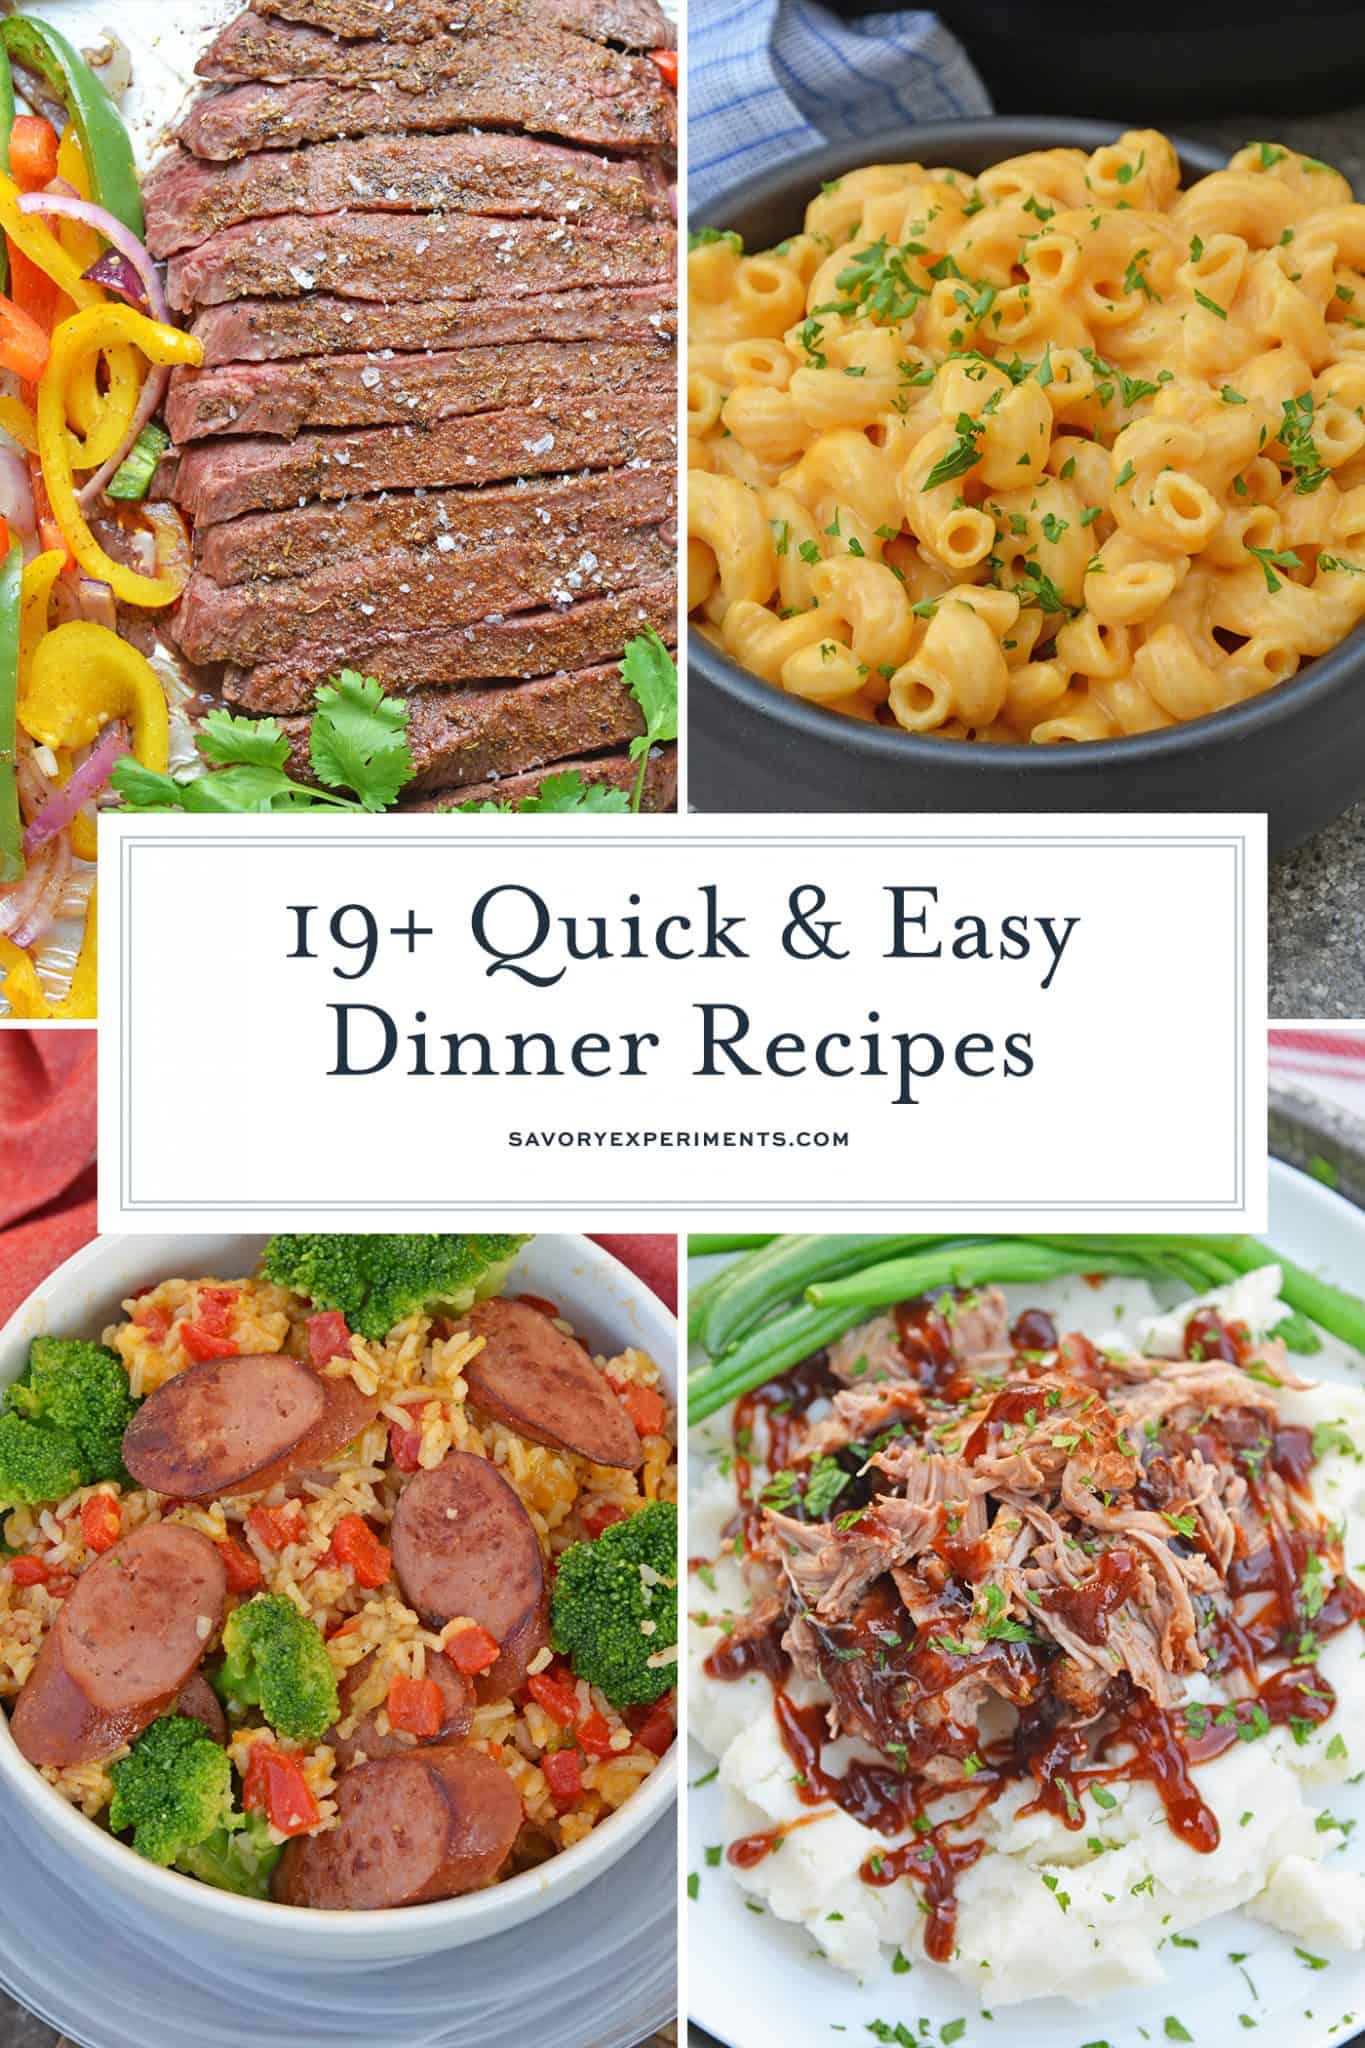 The Best Ideas For Quick And Easy Dinner Ideas Best Recipes Ideas And Collections